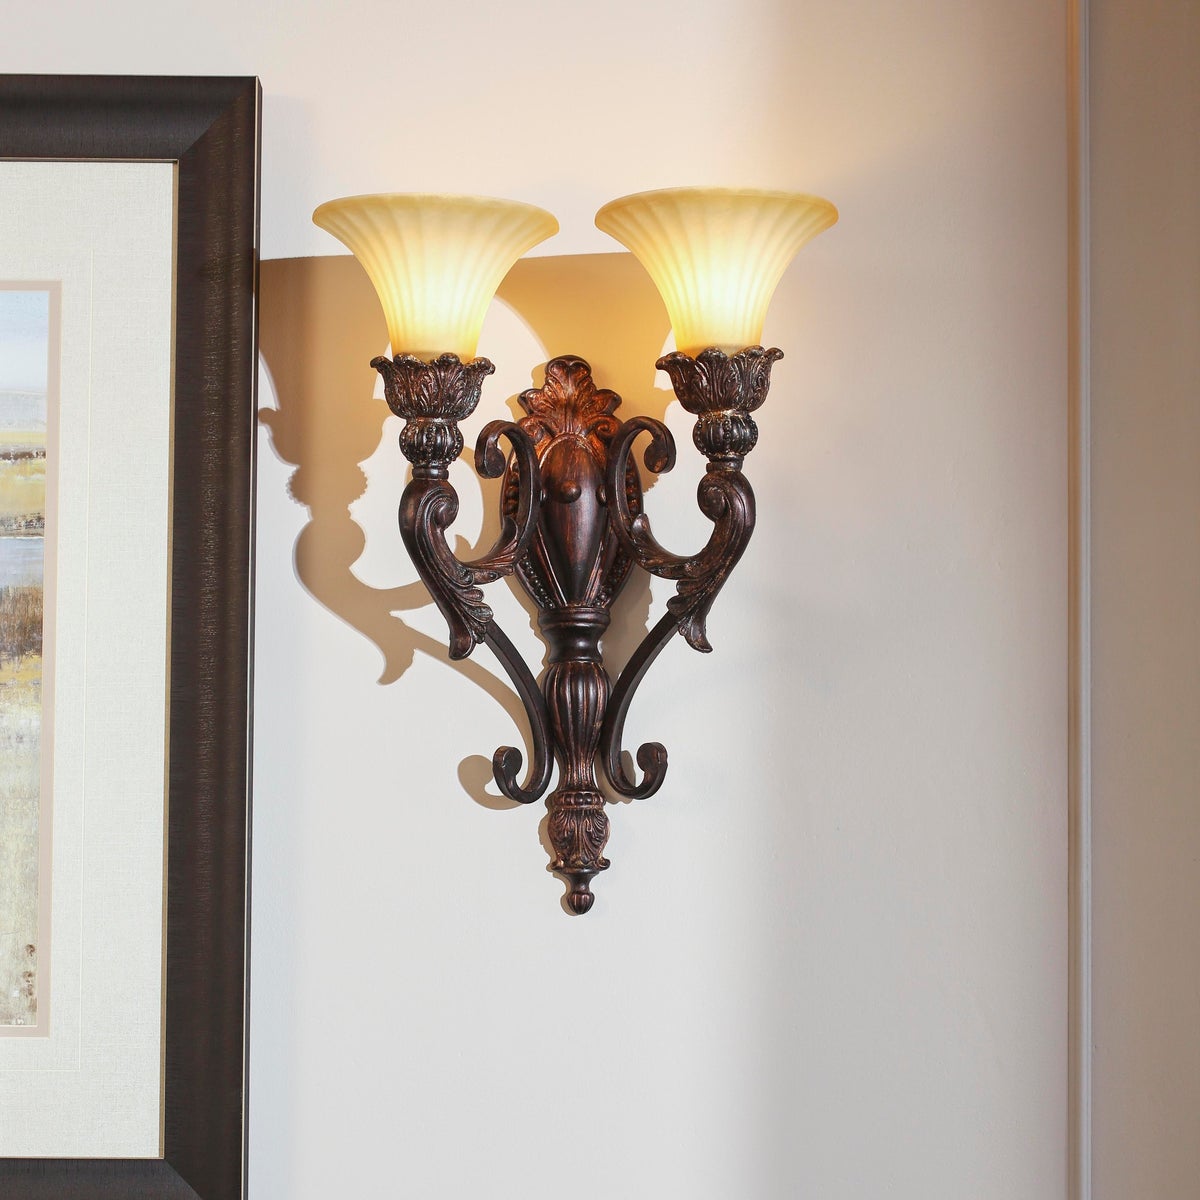 Traditional Wall Sconce with Corsican Gold Finish, 2 Lights. Classic design with ornate wood and bronze detailing. 15.75"W x 21.5"H x 8.5"E.